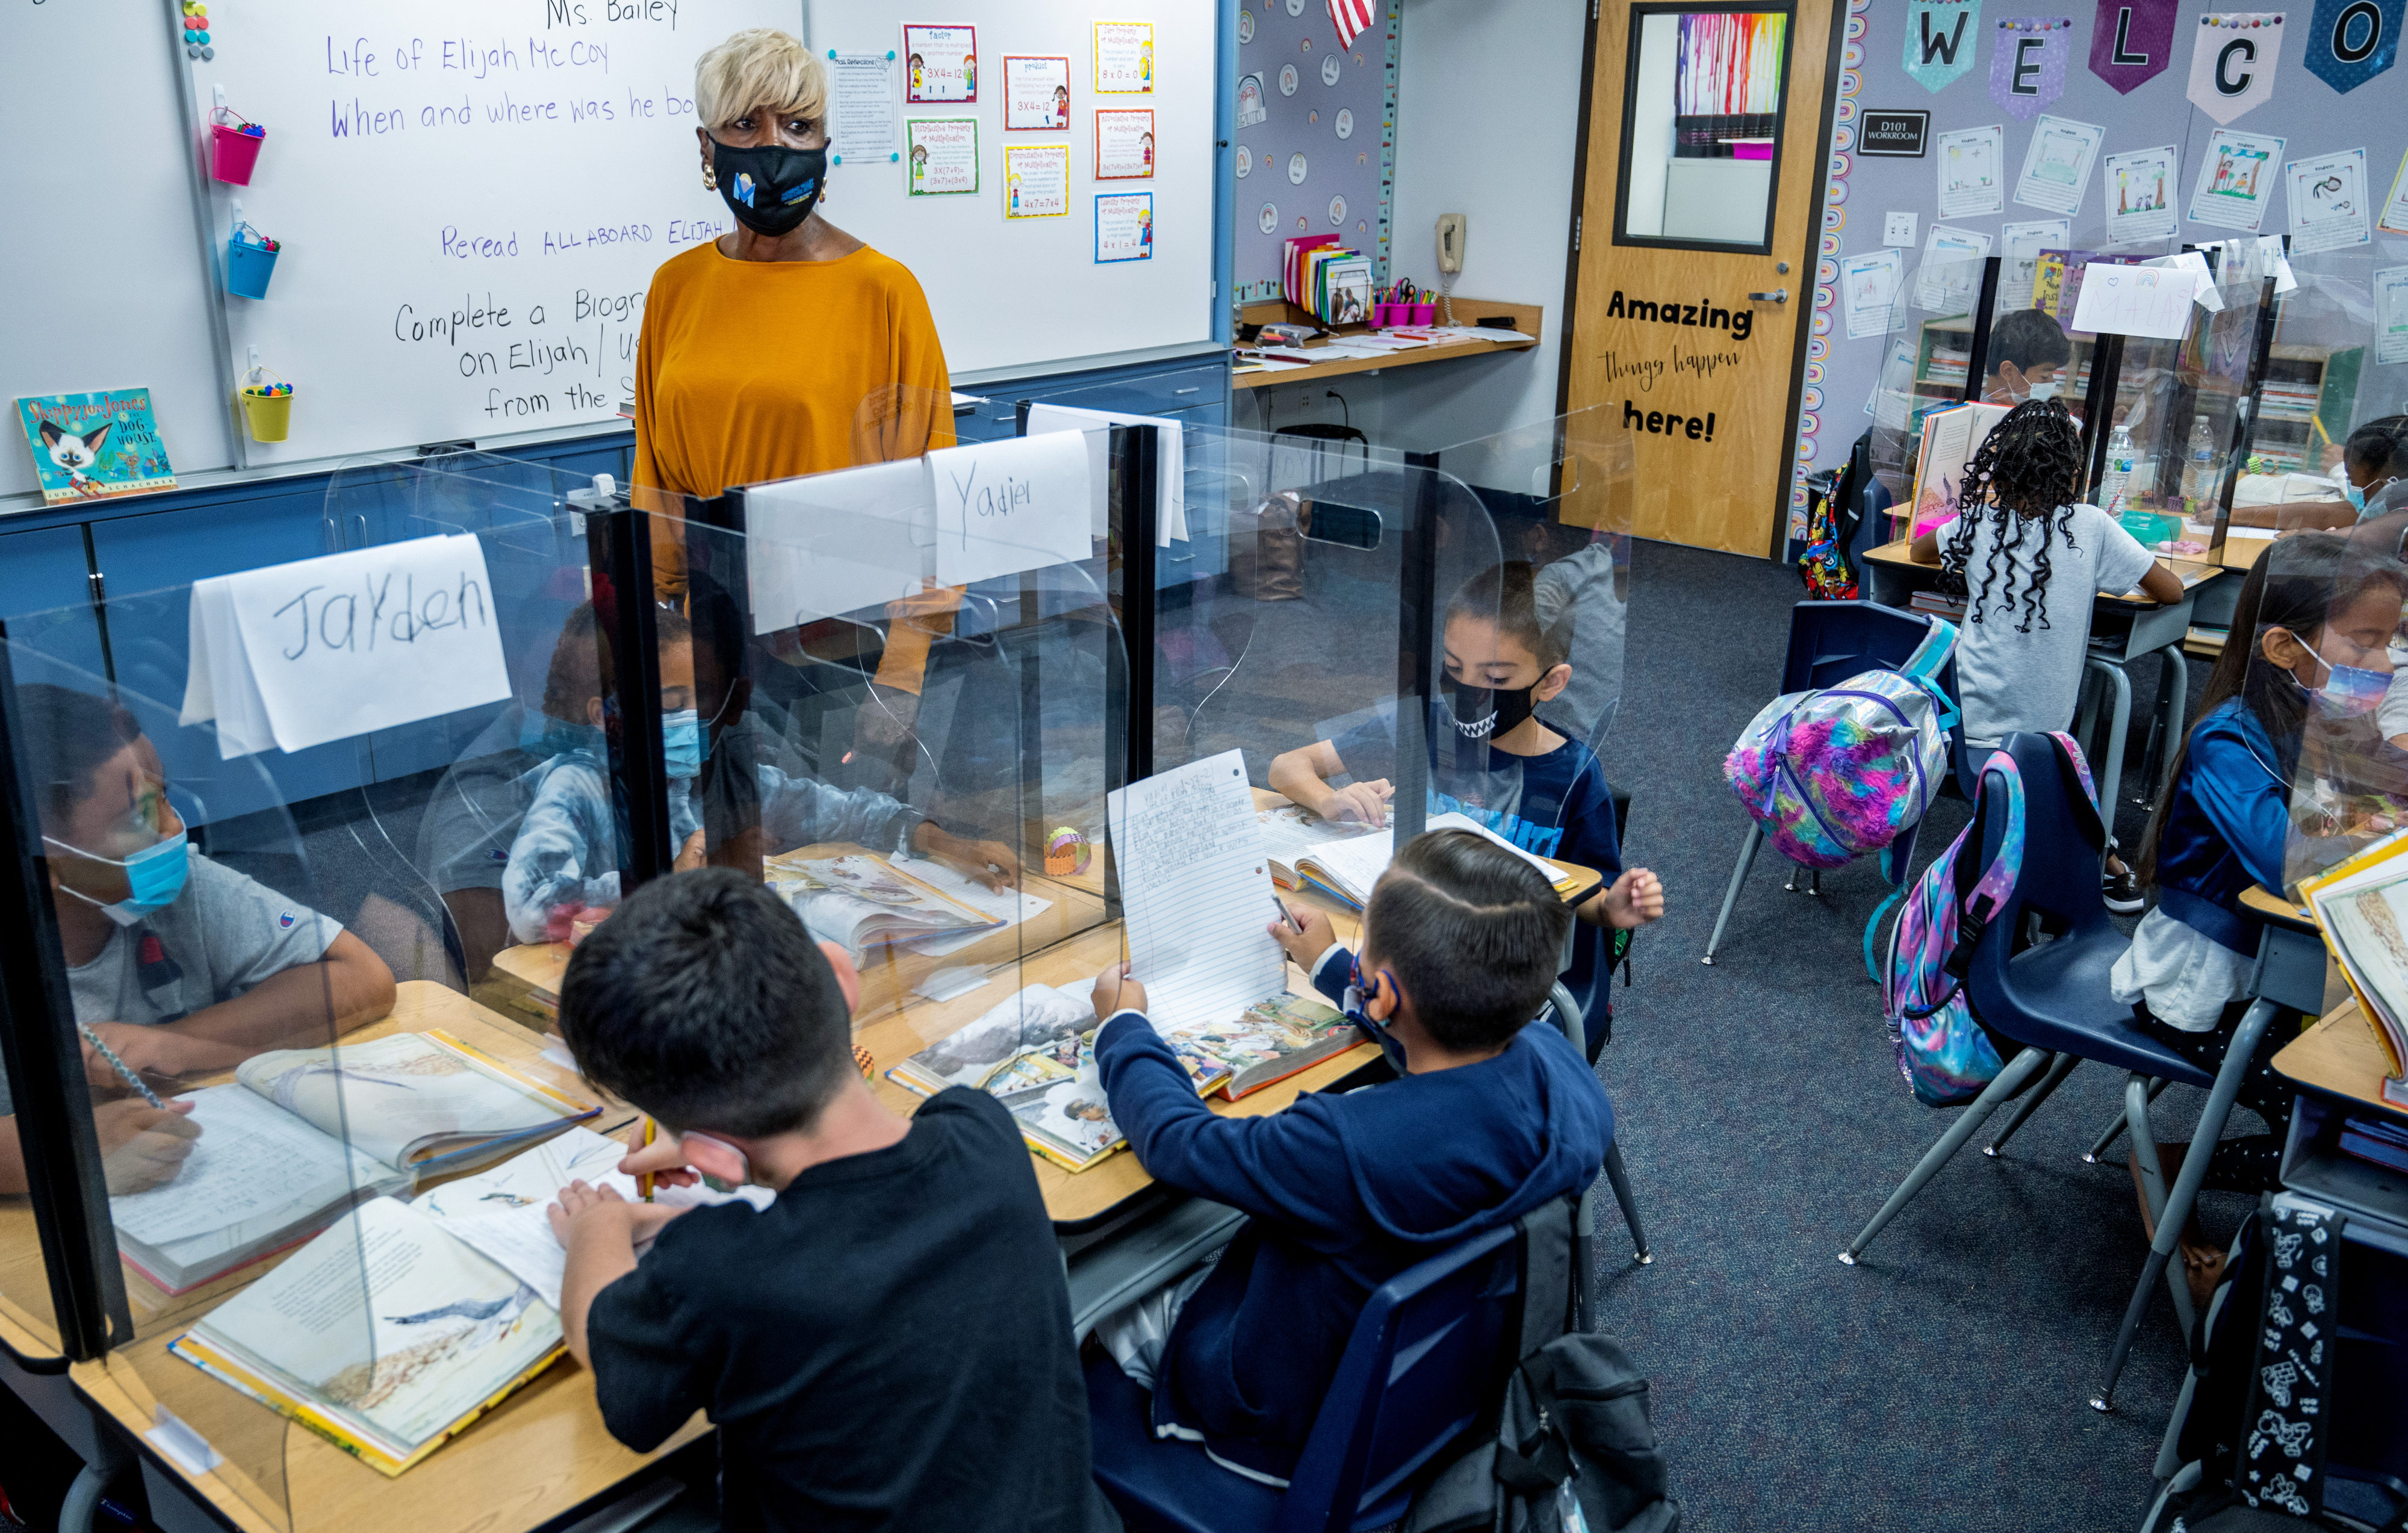 Dorothy Bailey, a substitute teacher, teaches a class at La Jolla Elementary School in Moreno Valley, Calif., on Sept. 23, 2021. (Terry Pierson—MediaNews Group/Press-Enterprise/Getty Images)